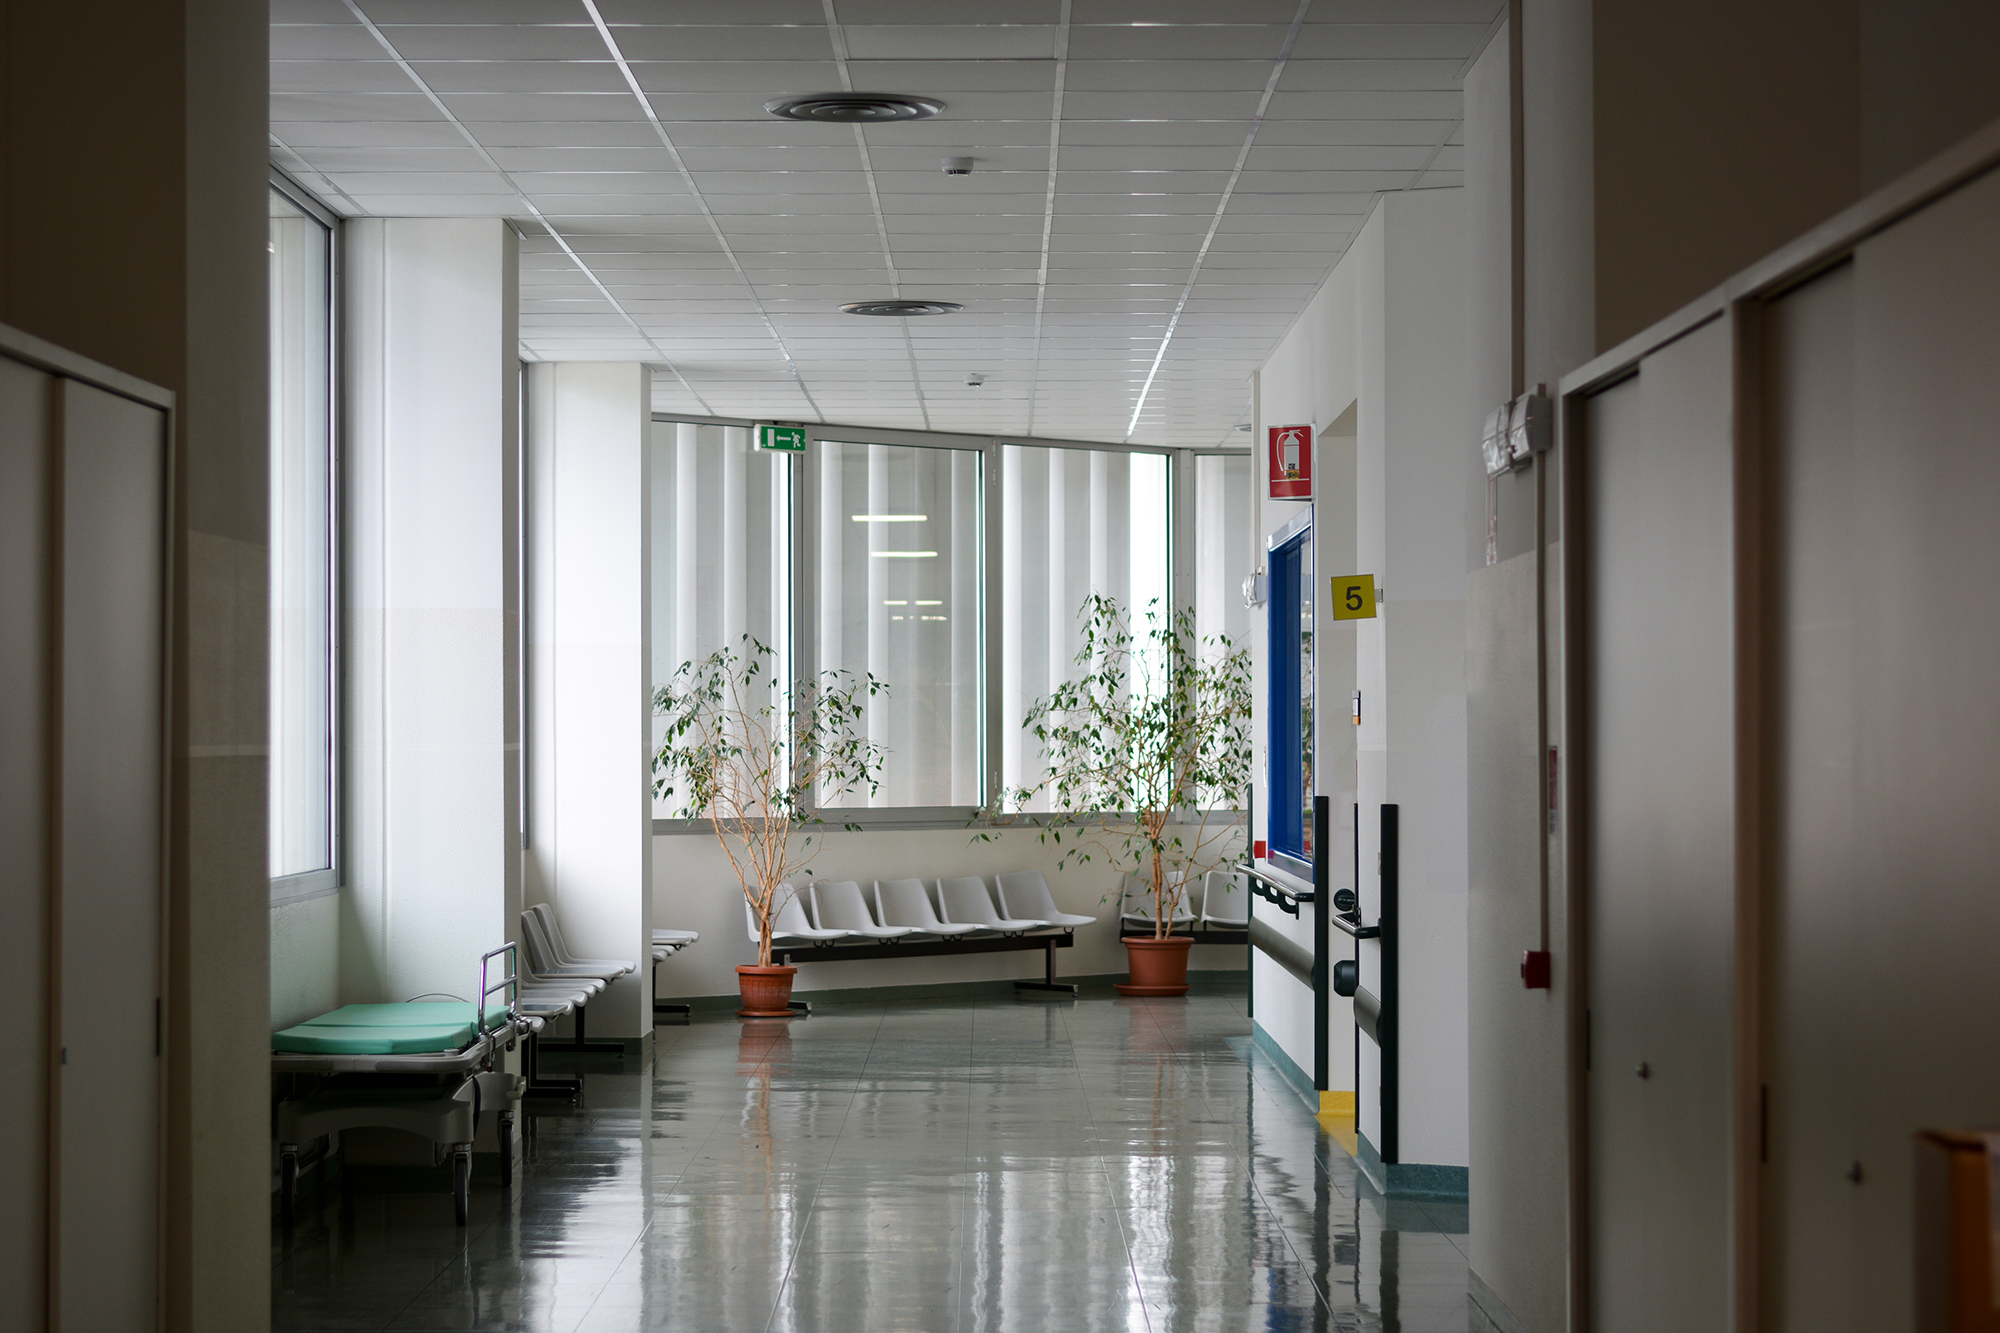 Nearly 10% of rural counties in the South are losing hospitals